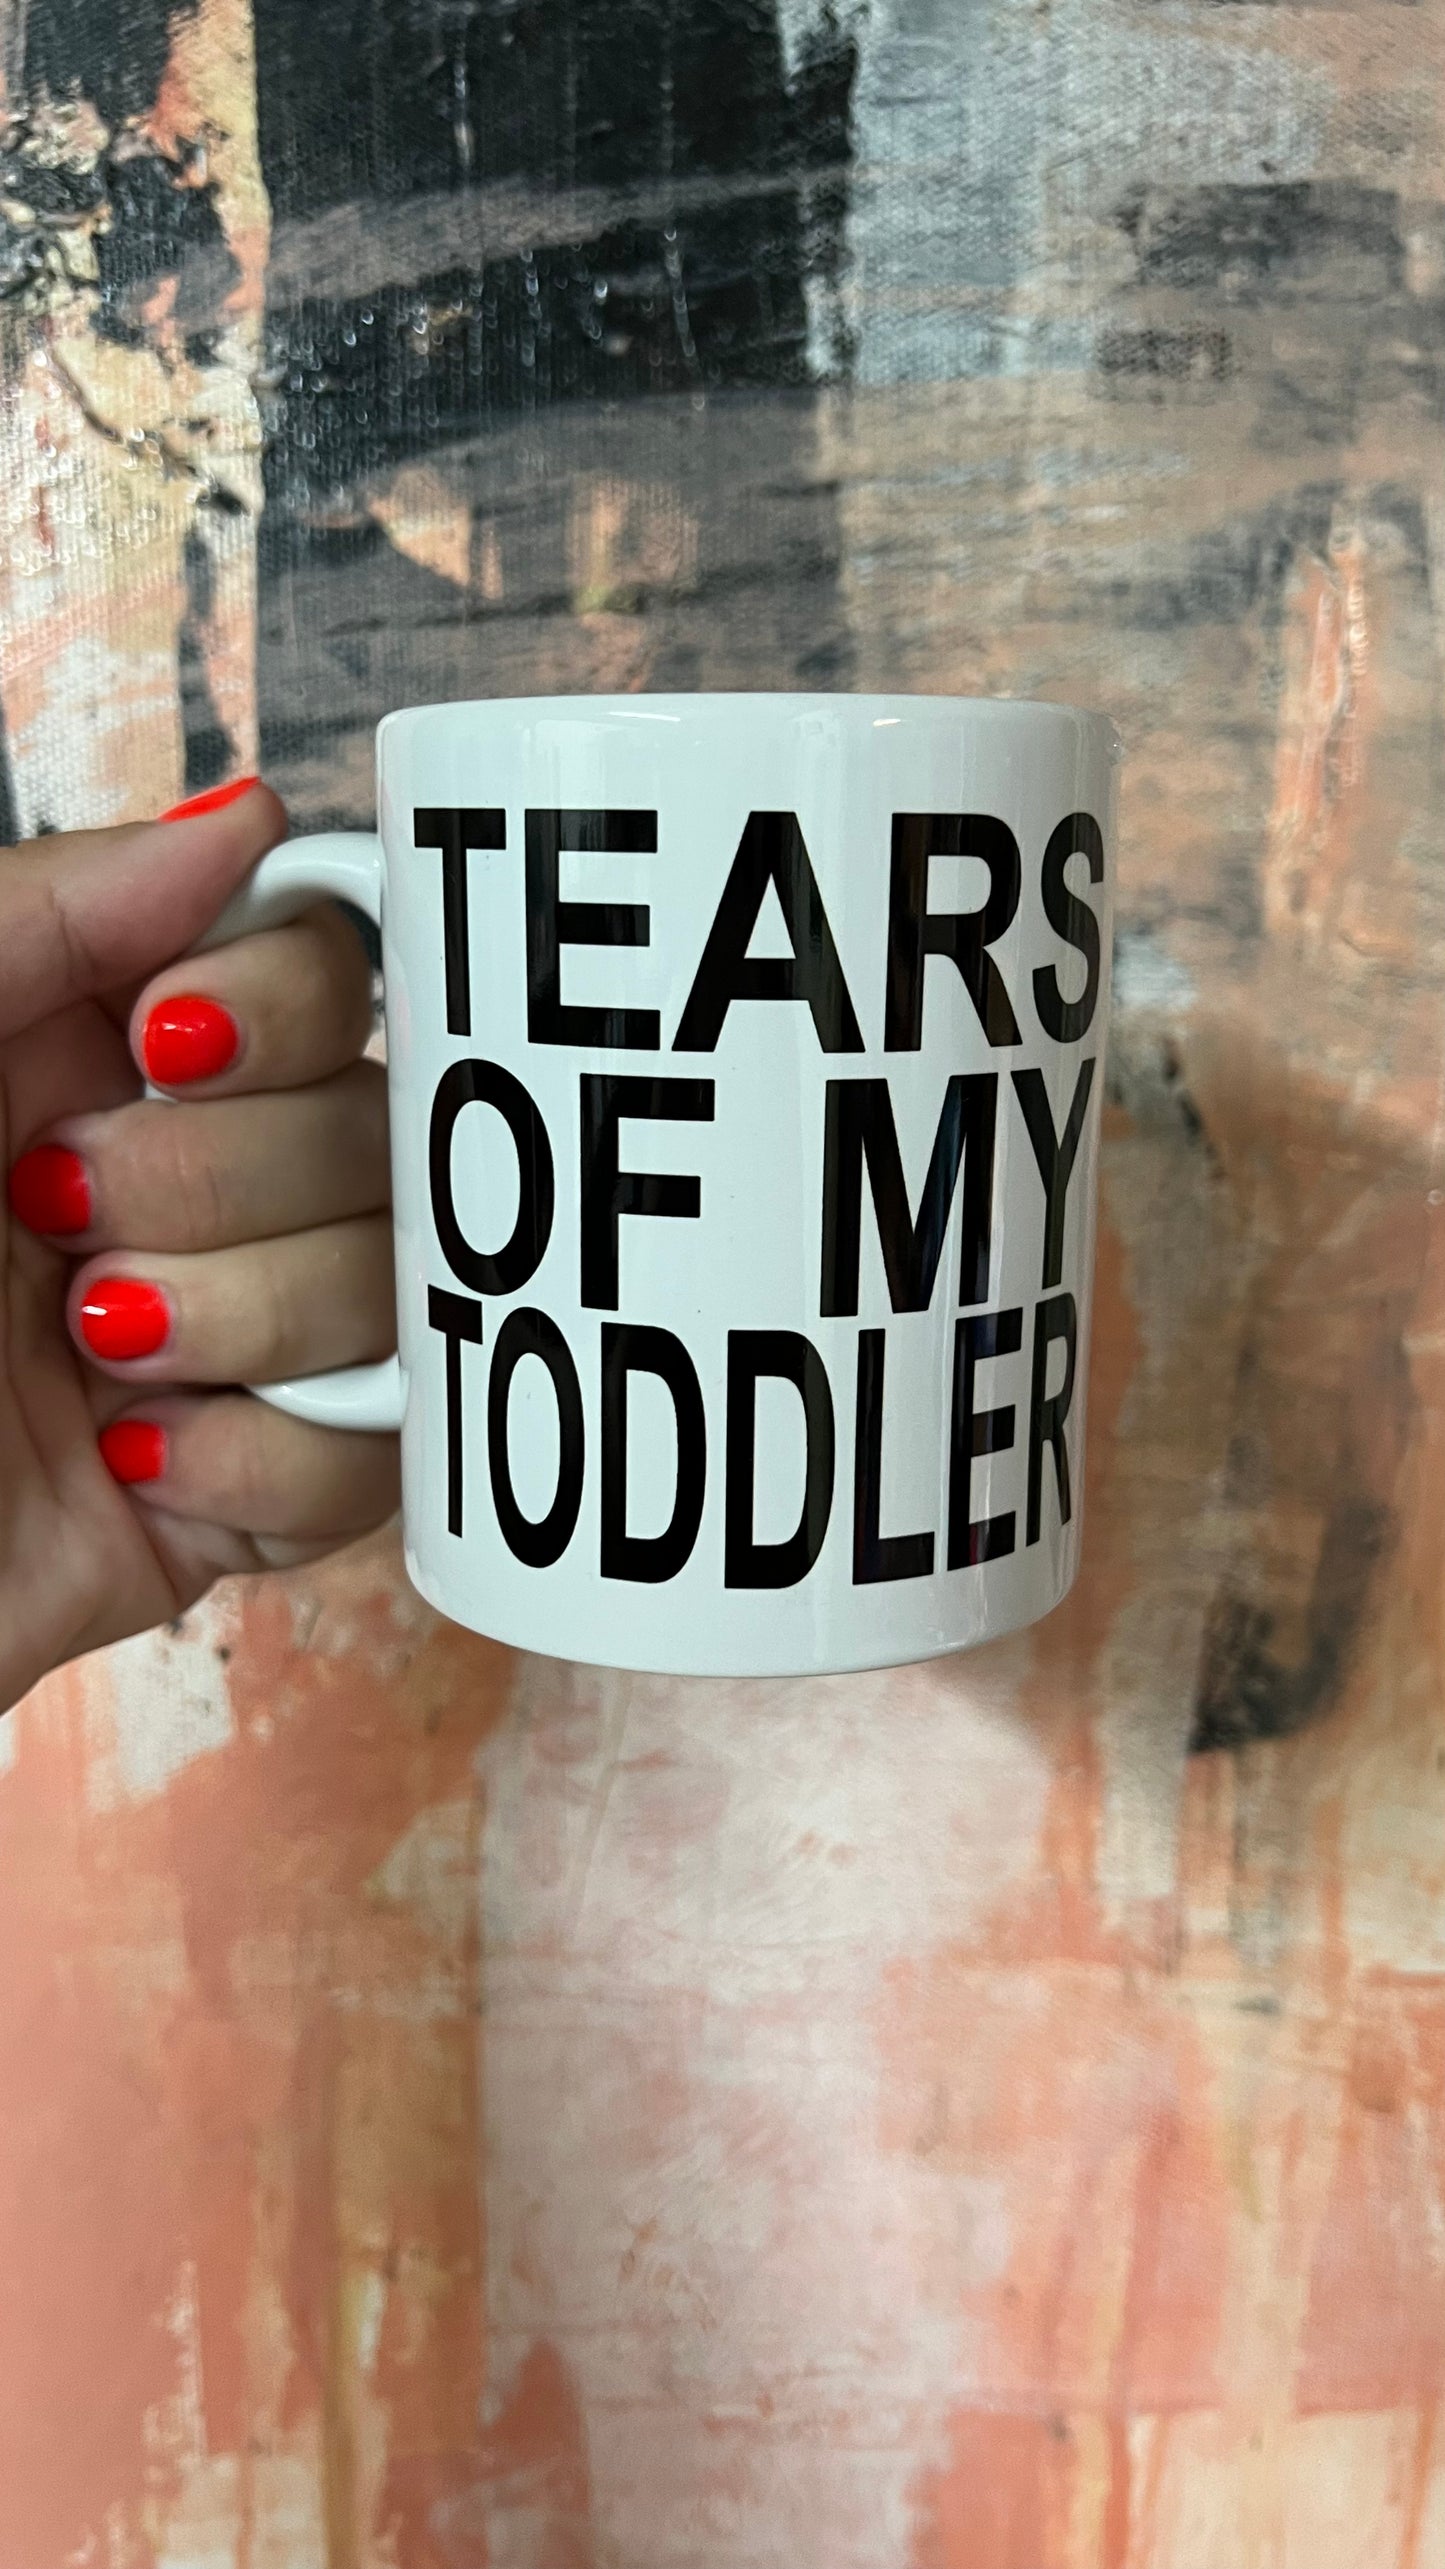 Tears of my toddler